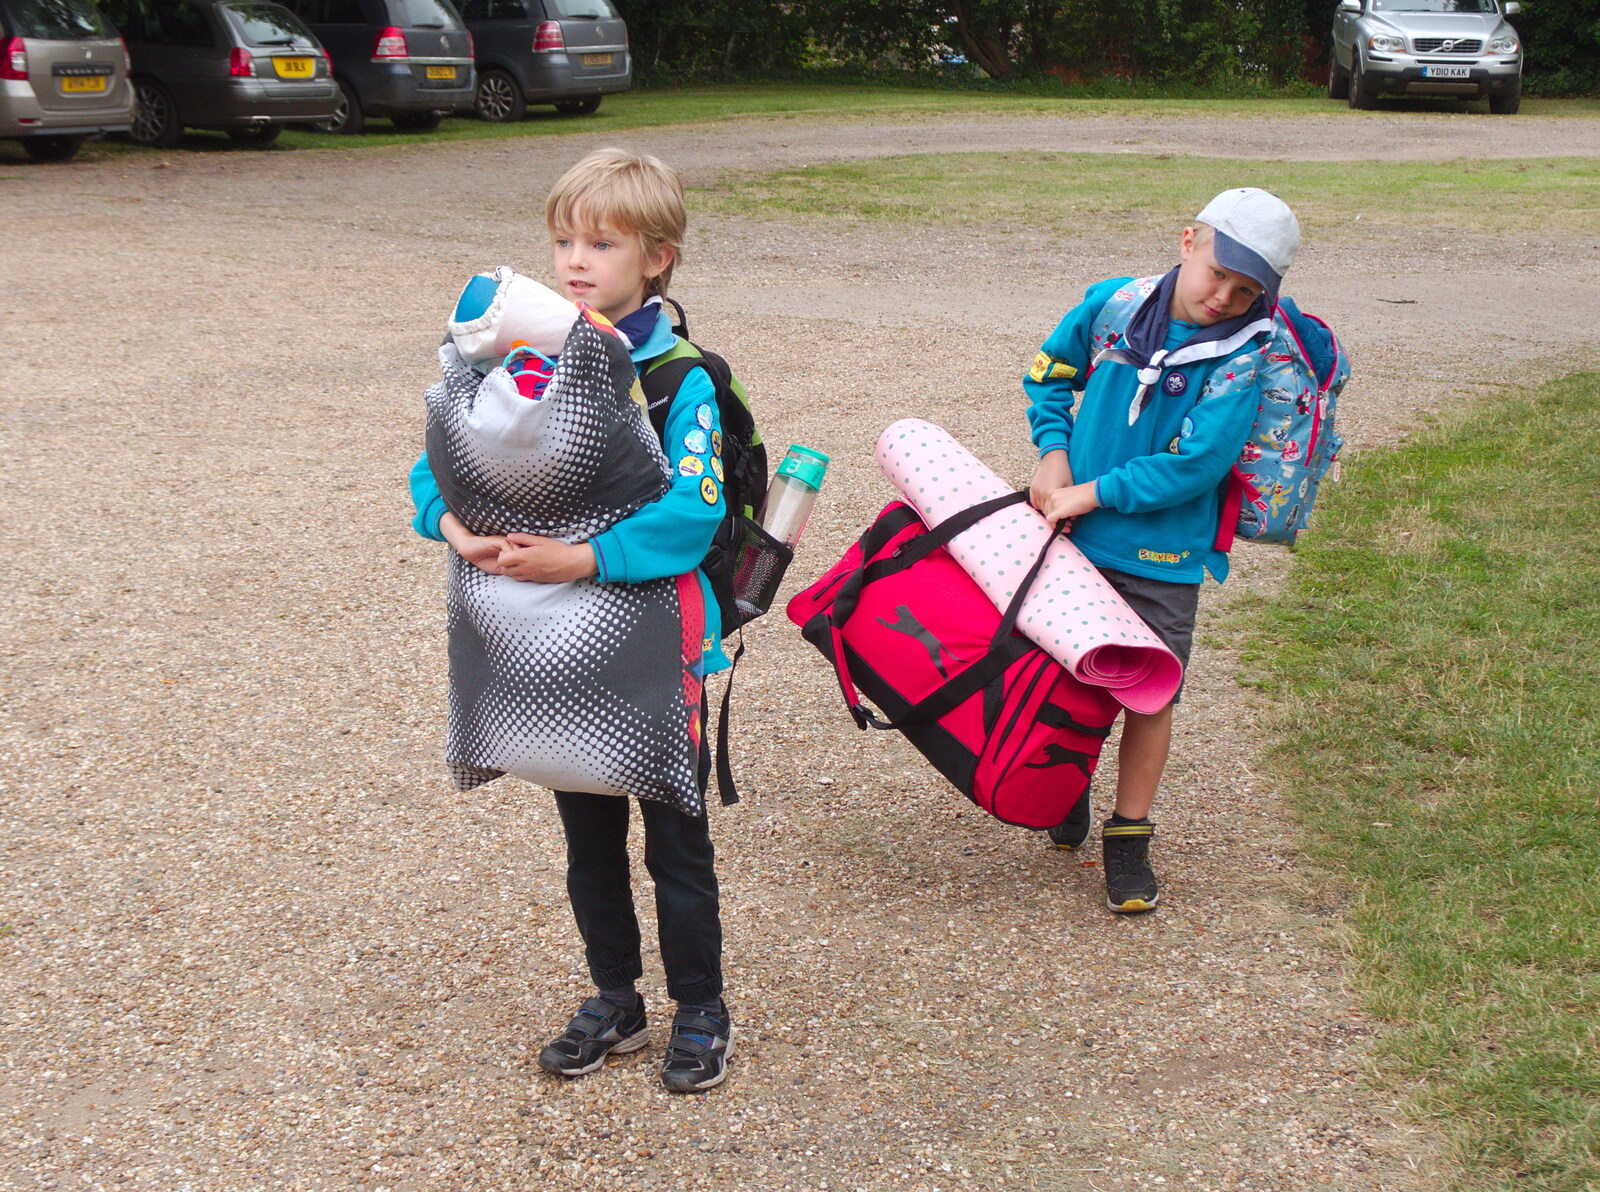 Jacob hauls his very heavy bag around from A Postcard from Boxford and BSCC at Pulham, Suffolk and Norfolk - 13th July 2019